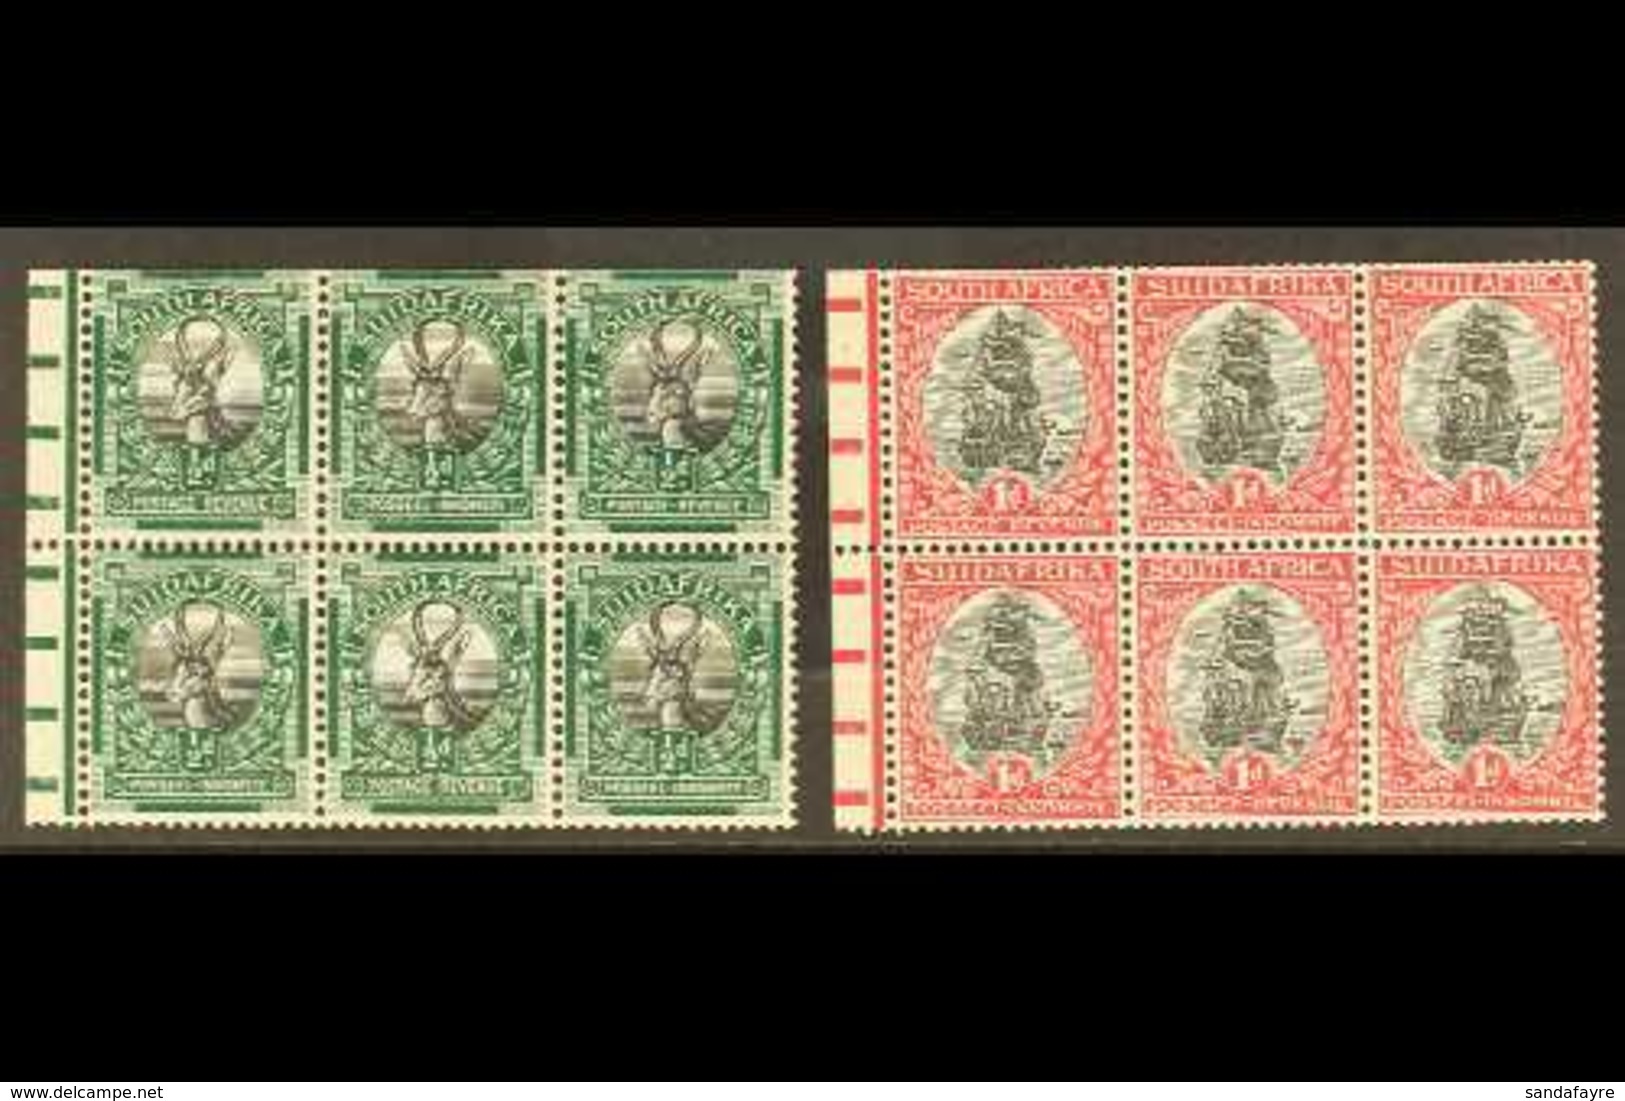 BOOKLET PANES 1926 ½d & 1d Booklet Panes Of 6, Both Watermark Inverted, London Printings, SG 30cw, 31dw, Ex SG SB5, Very - Unclassified